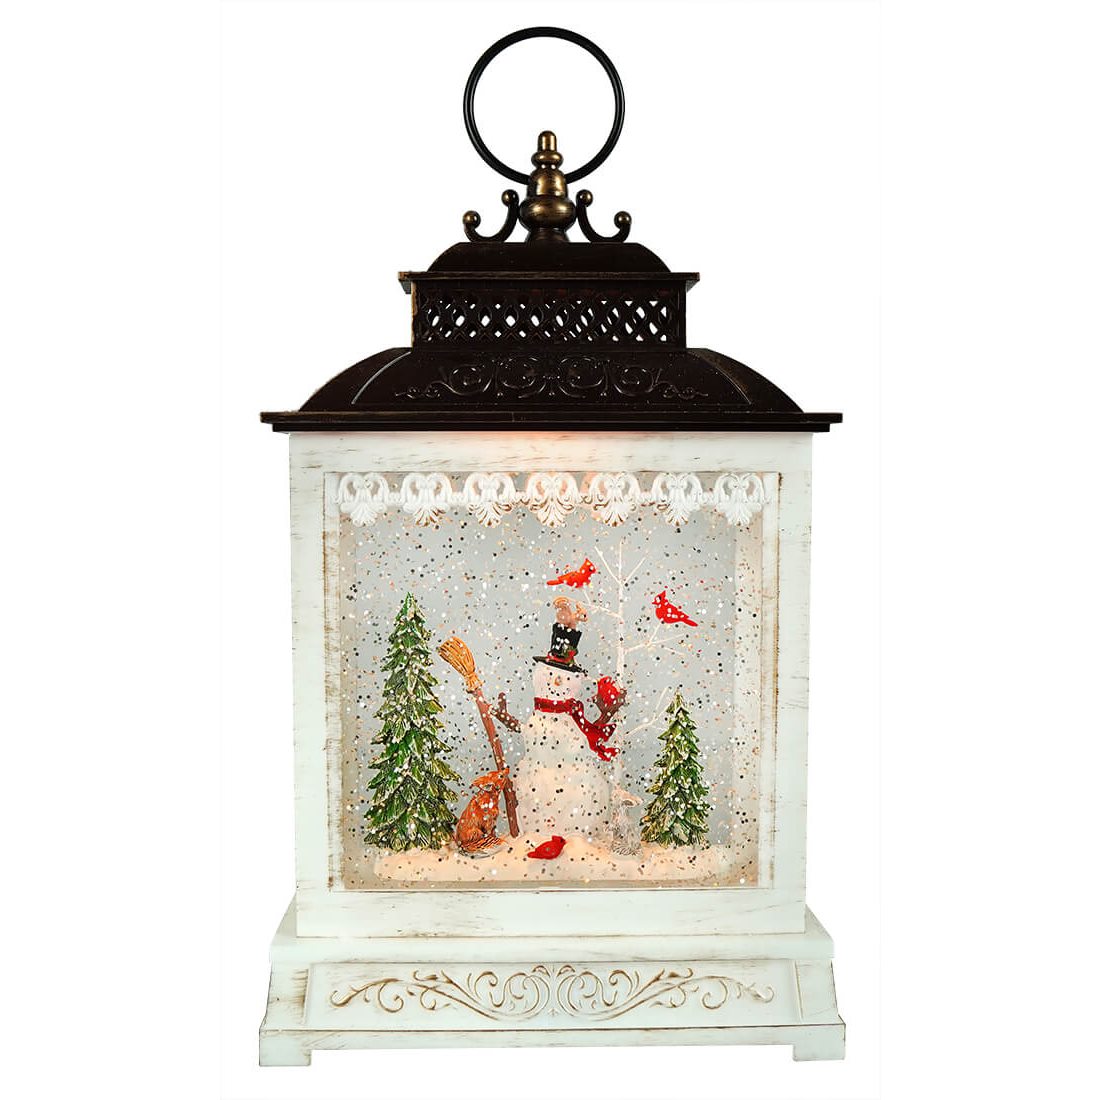 Snowman with Cardinals Musical Lighted Water Lantern